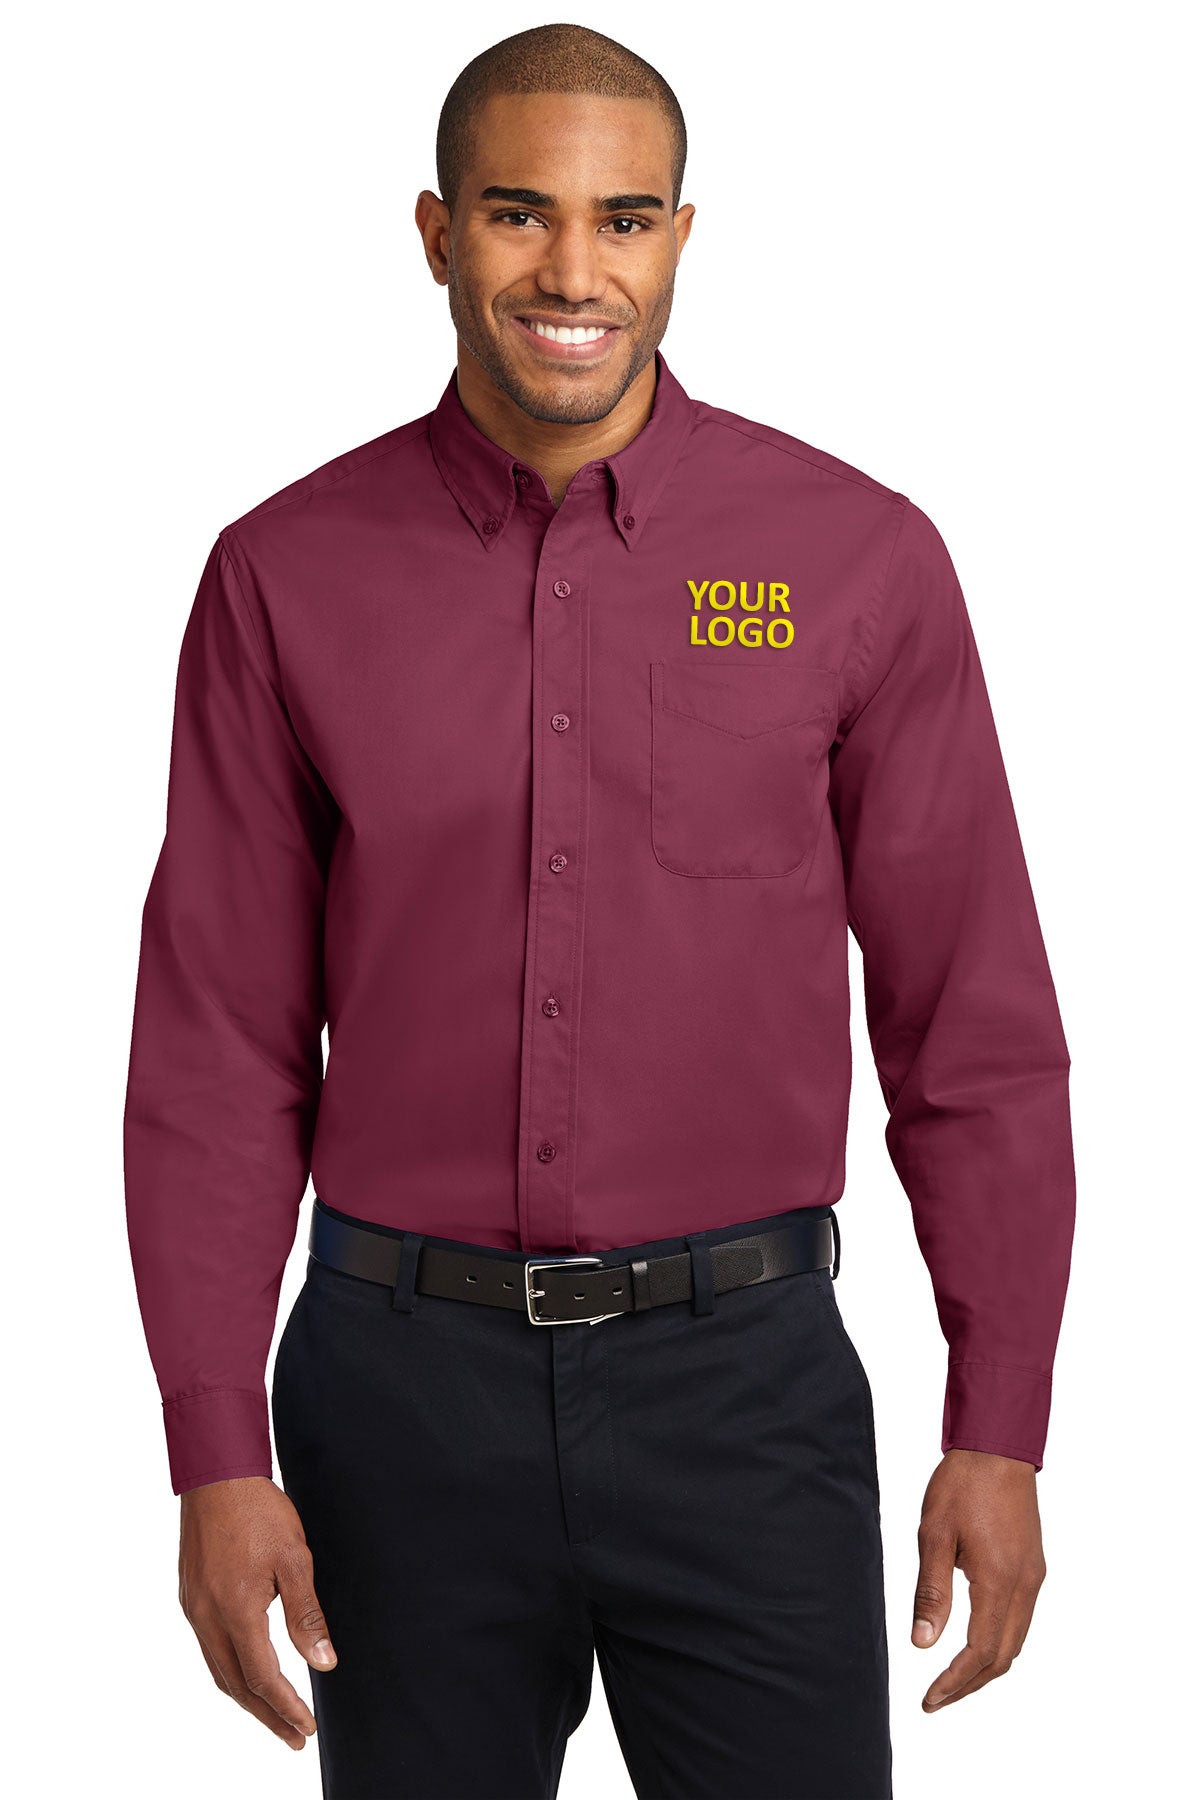 Port Authority Burgundy/ Light Stone TLS608 order embroidered polo shirts